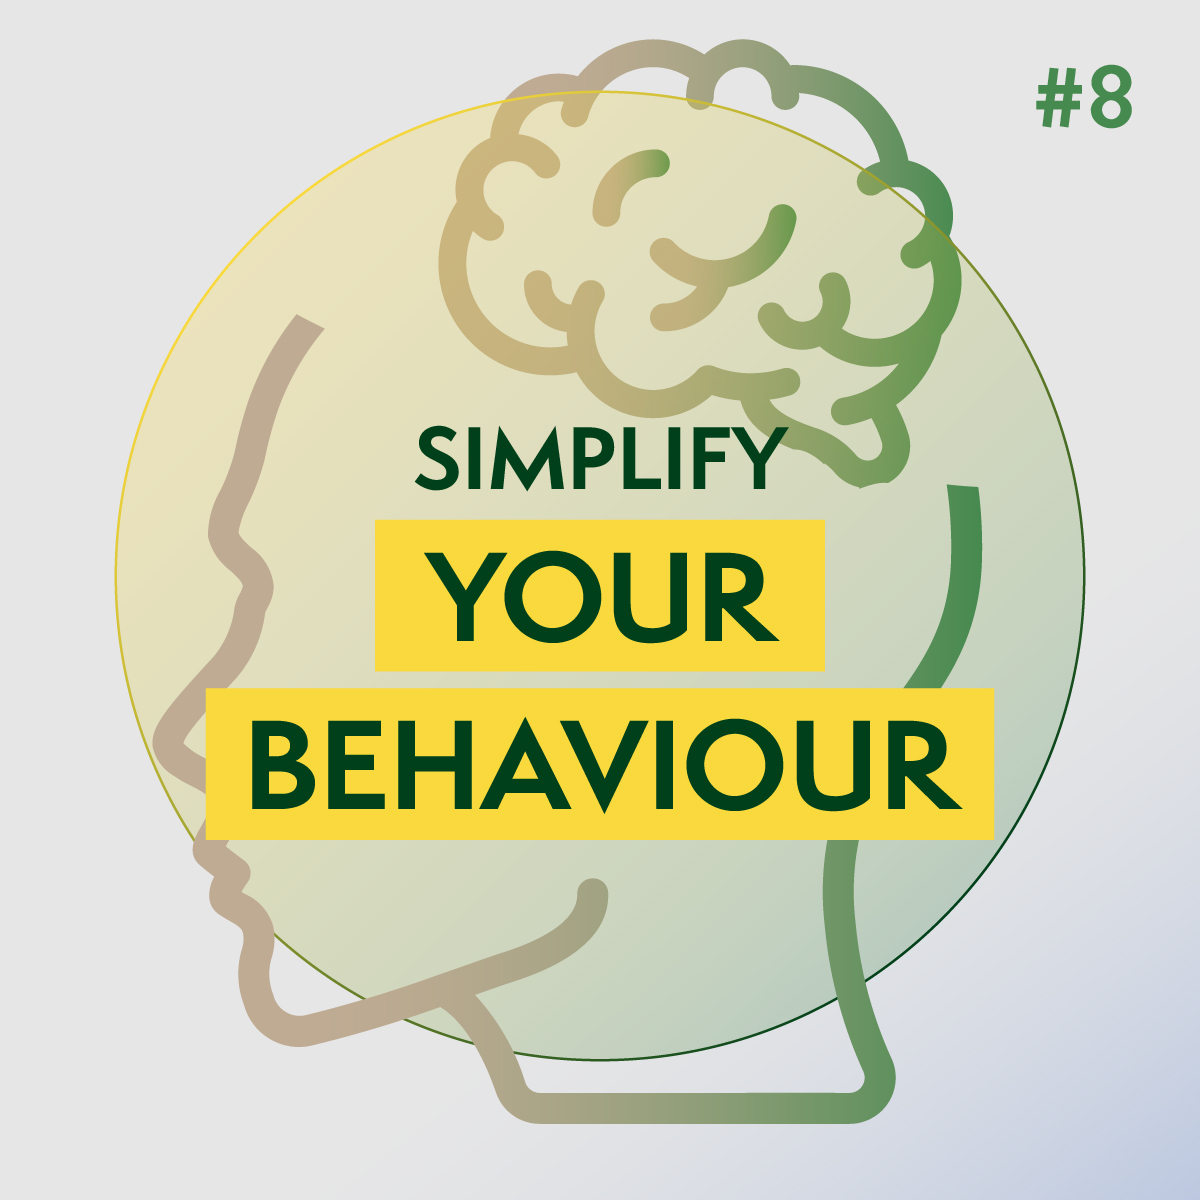 Simplify Your Behaviour - Image of a human head with brain.